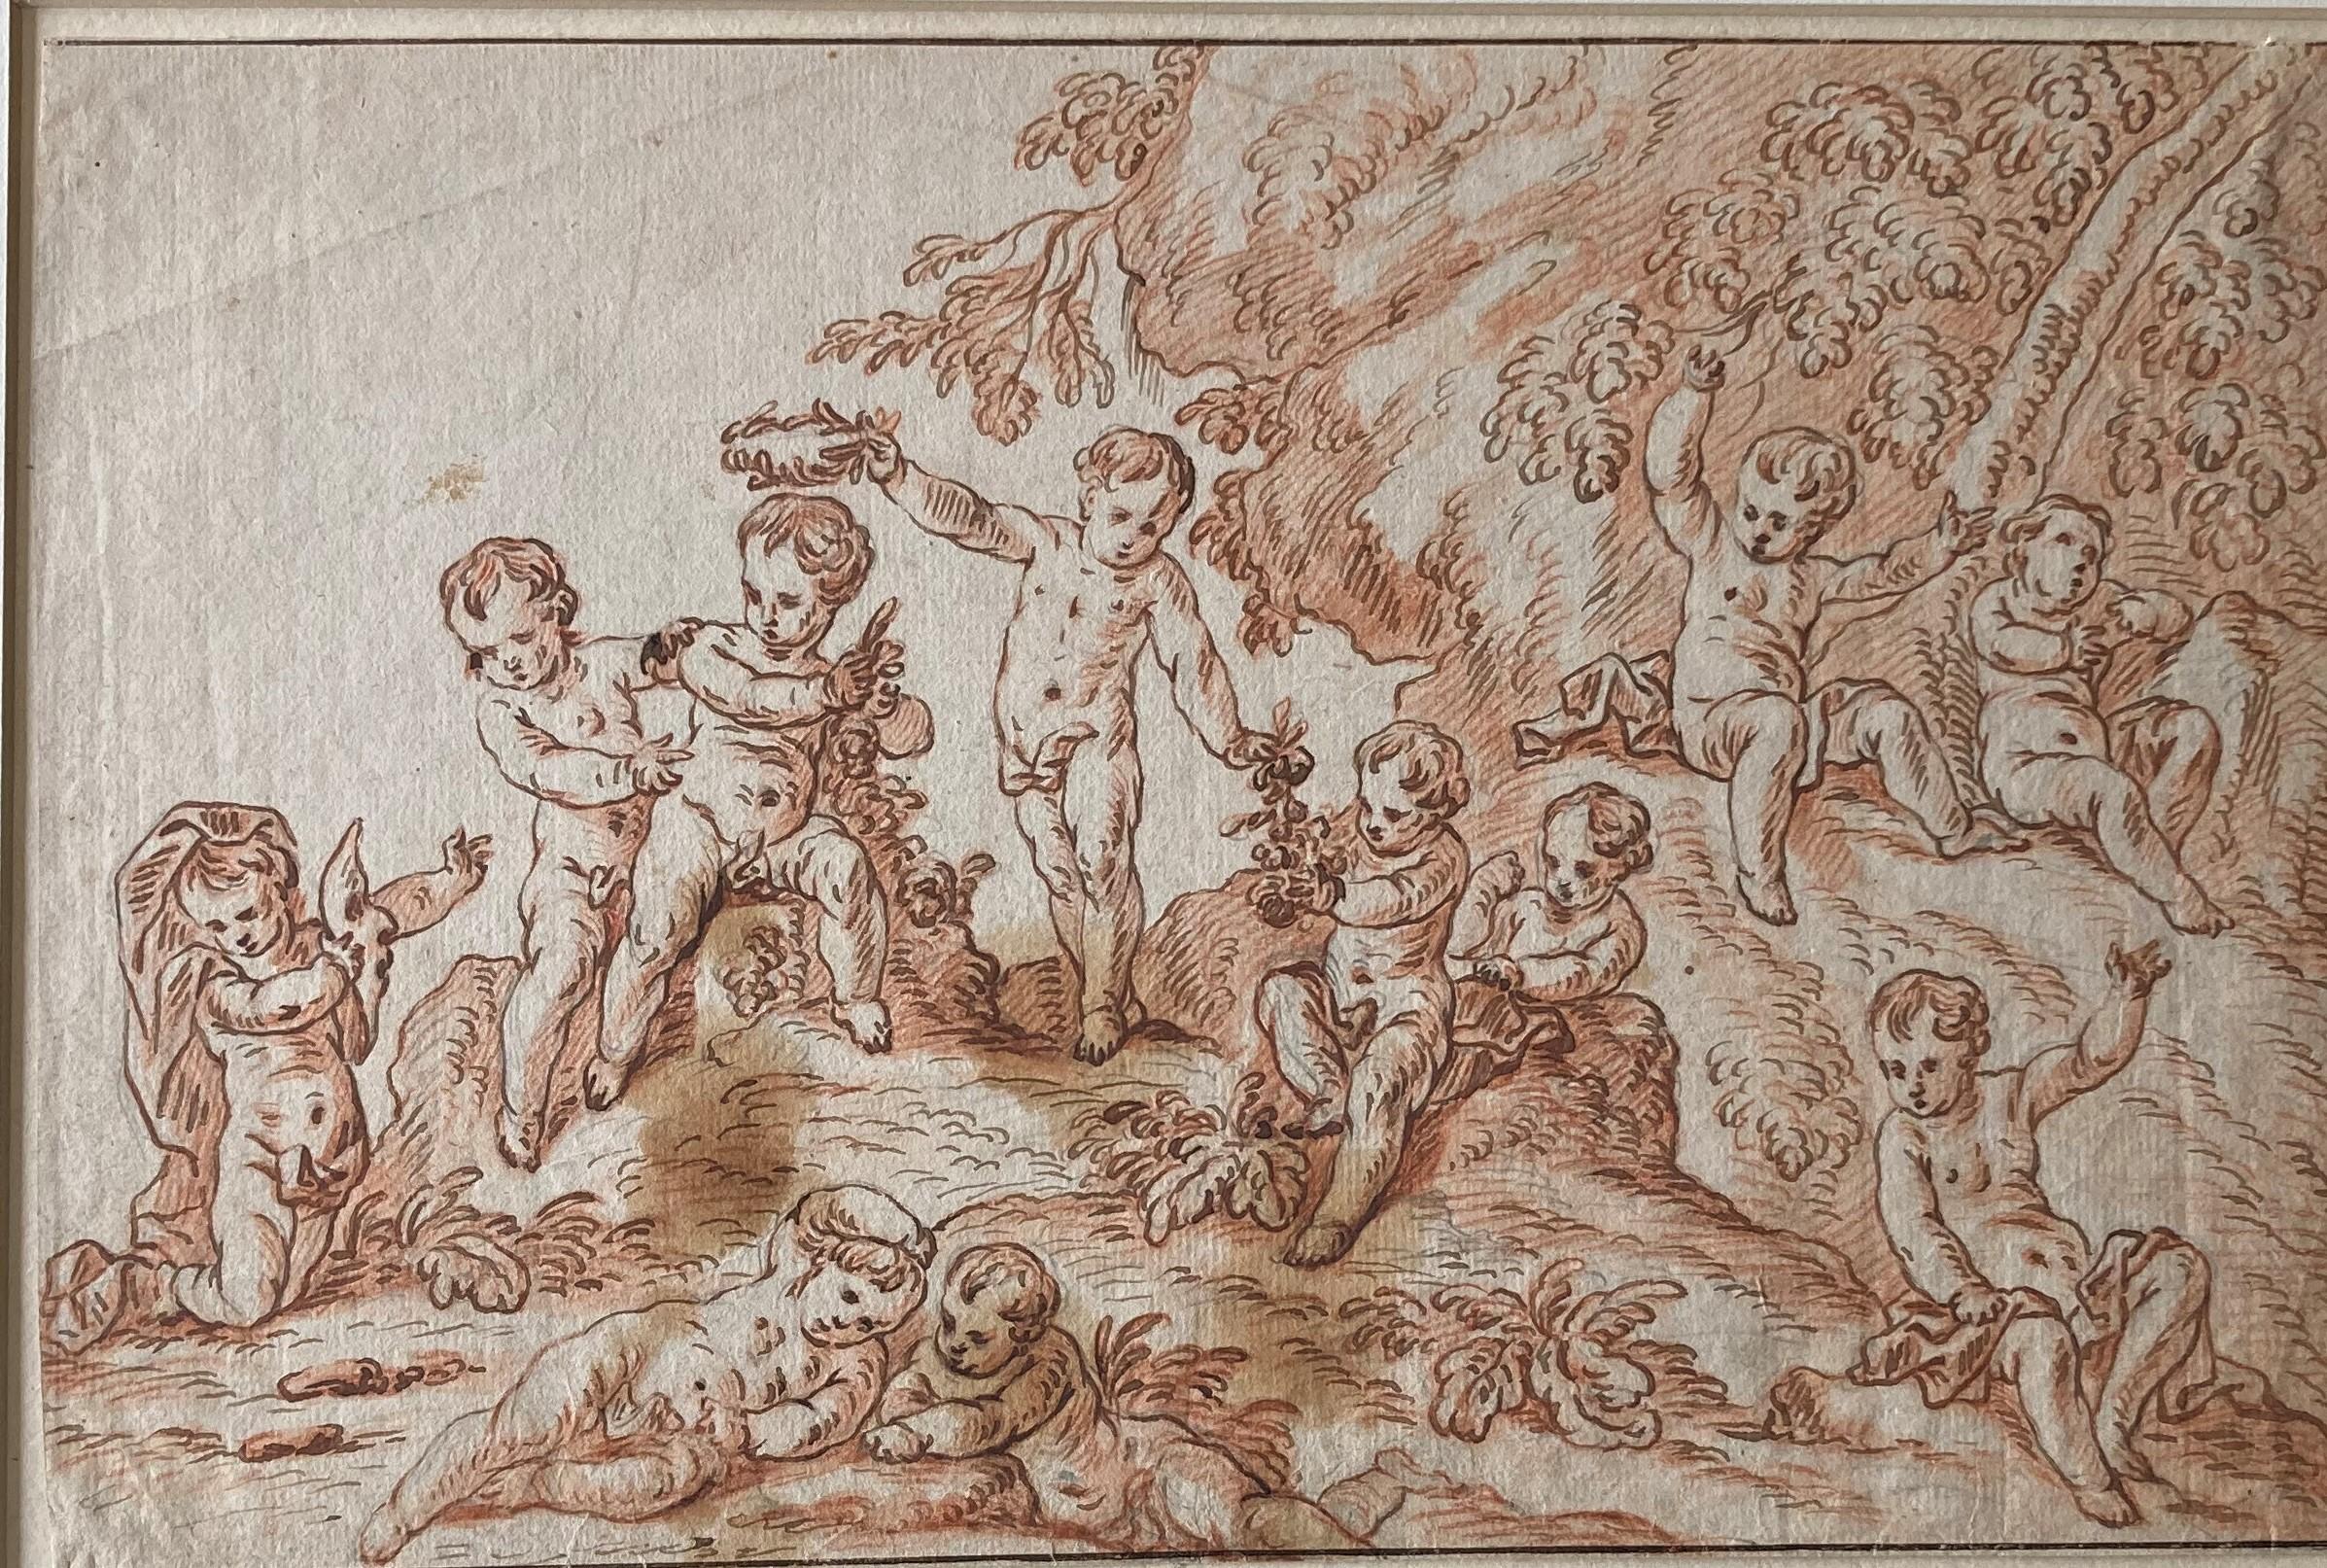 Putti in a Landscape, Putti playing, flowers, Berchet, French Art, Old Master